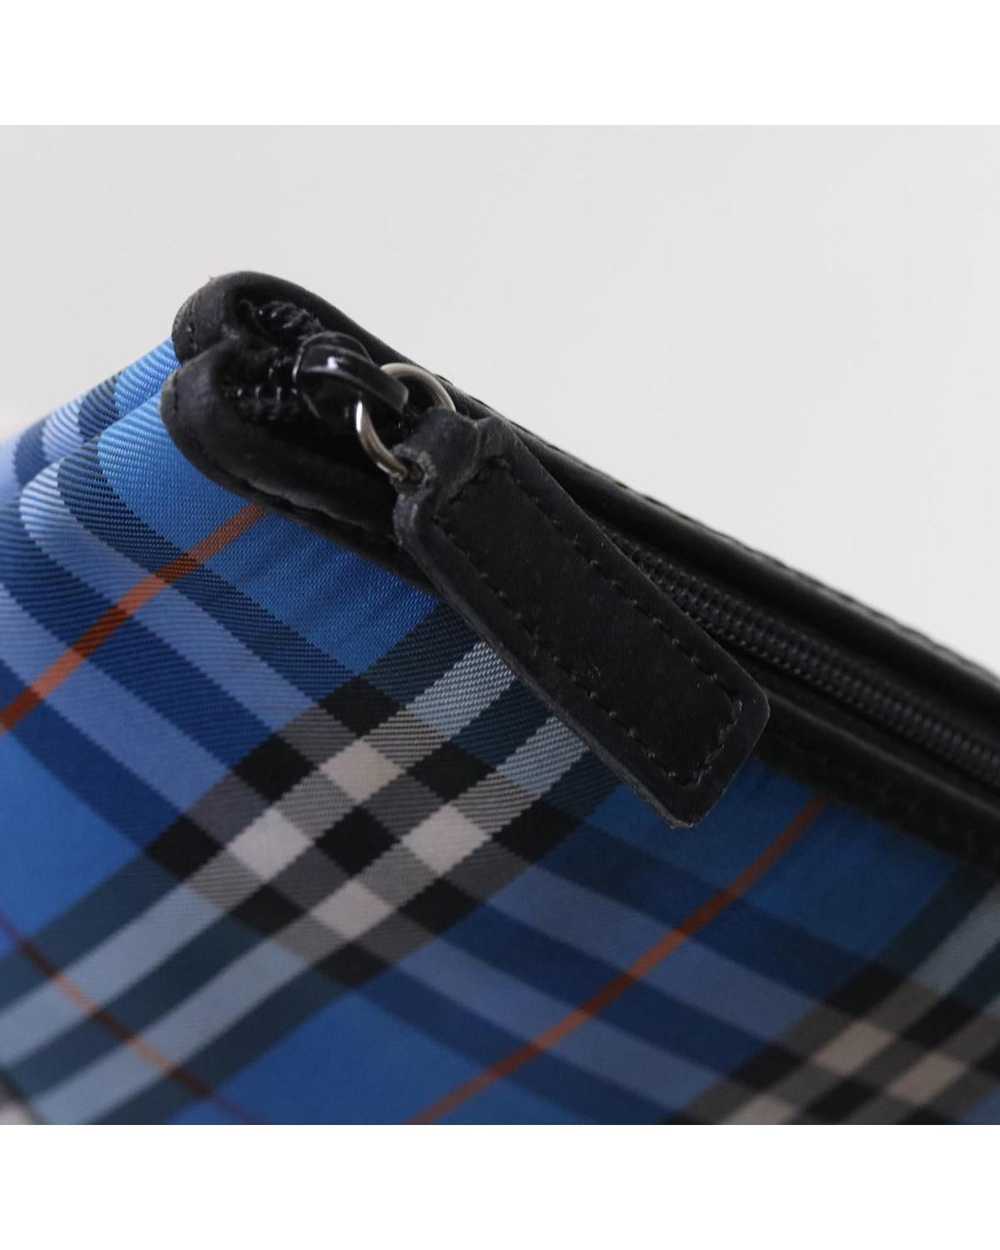 Burberry Blue Nylon Pouch with Check Print - image 8